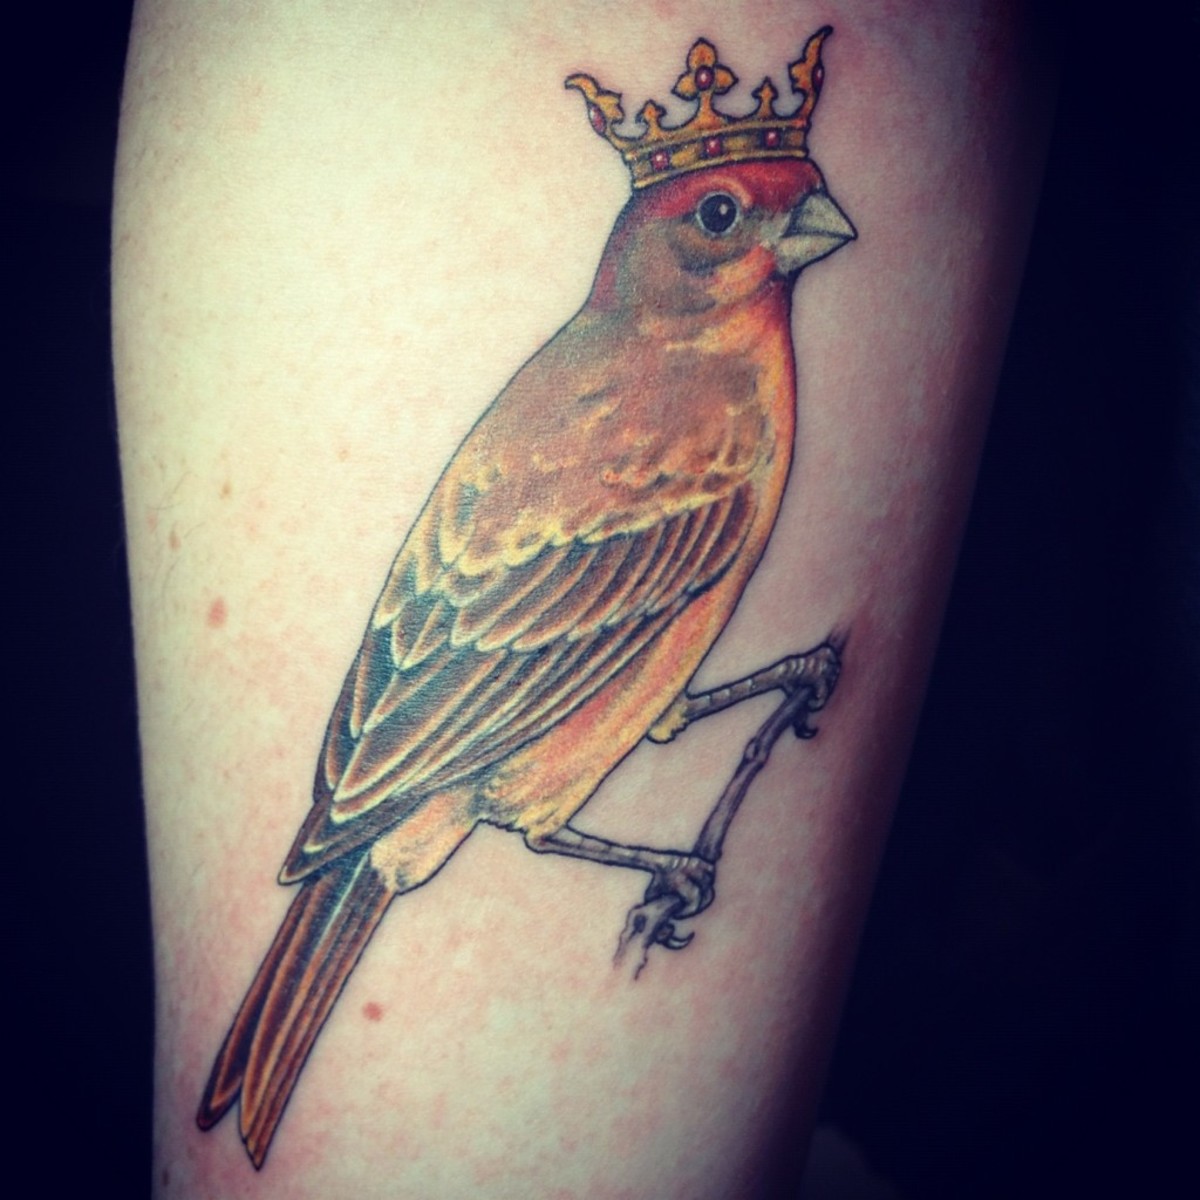 A tattoo of a yellow bird with a crown.